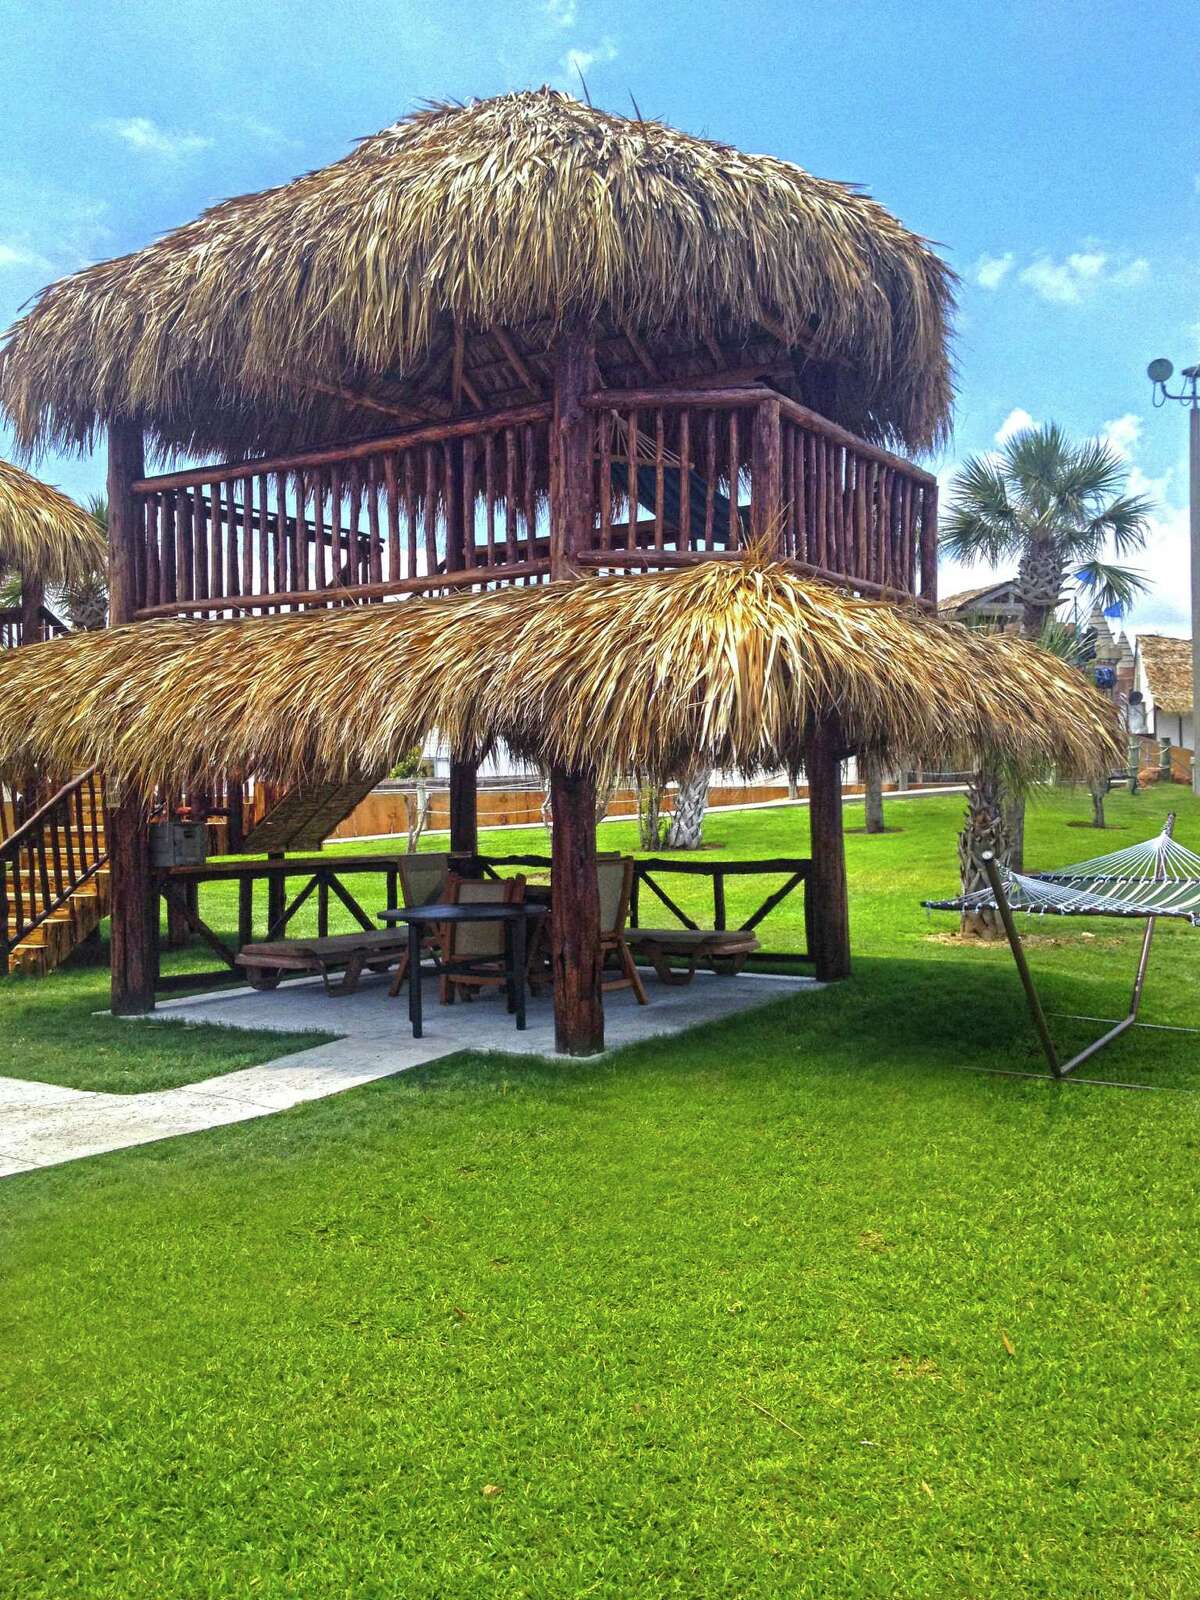 This multi-level cabana at Schlitterbahn in Galveston is the latest addition to the waterpark.